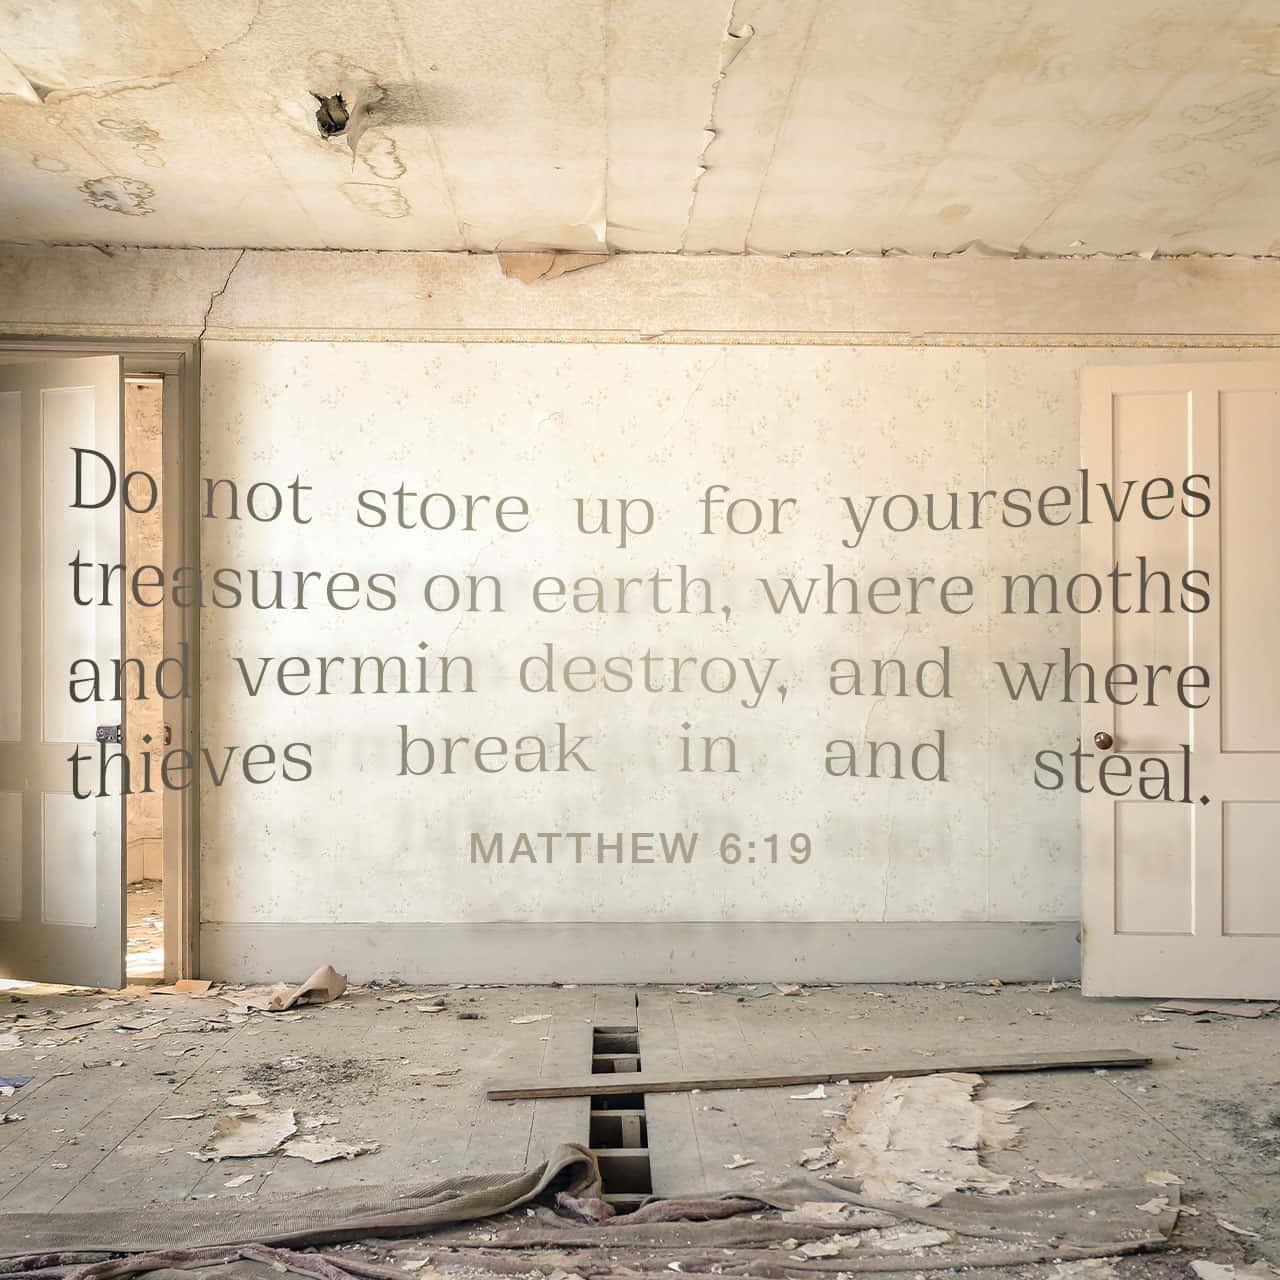 Matthew 6:19 "Do not store up for yourselves treasures on earth, where...